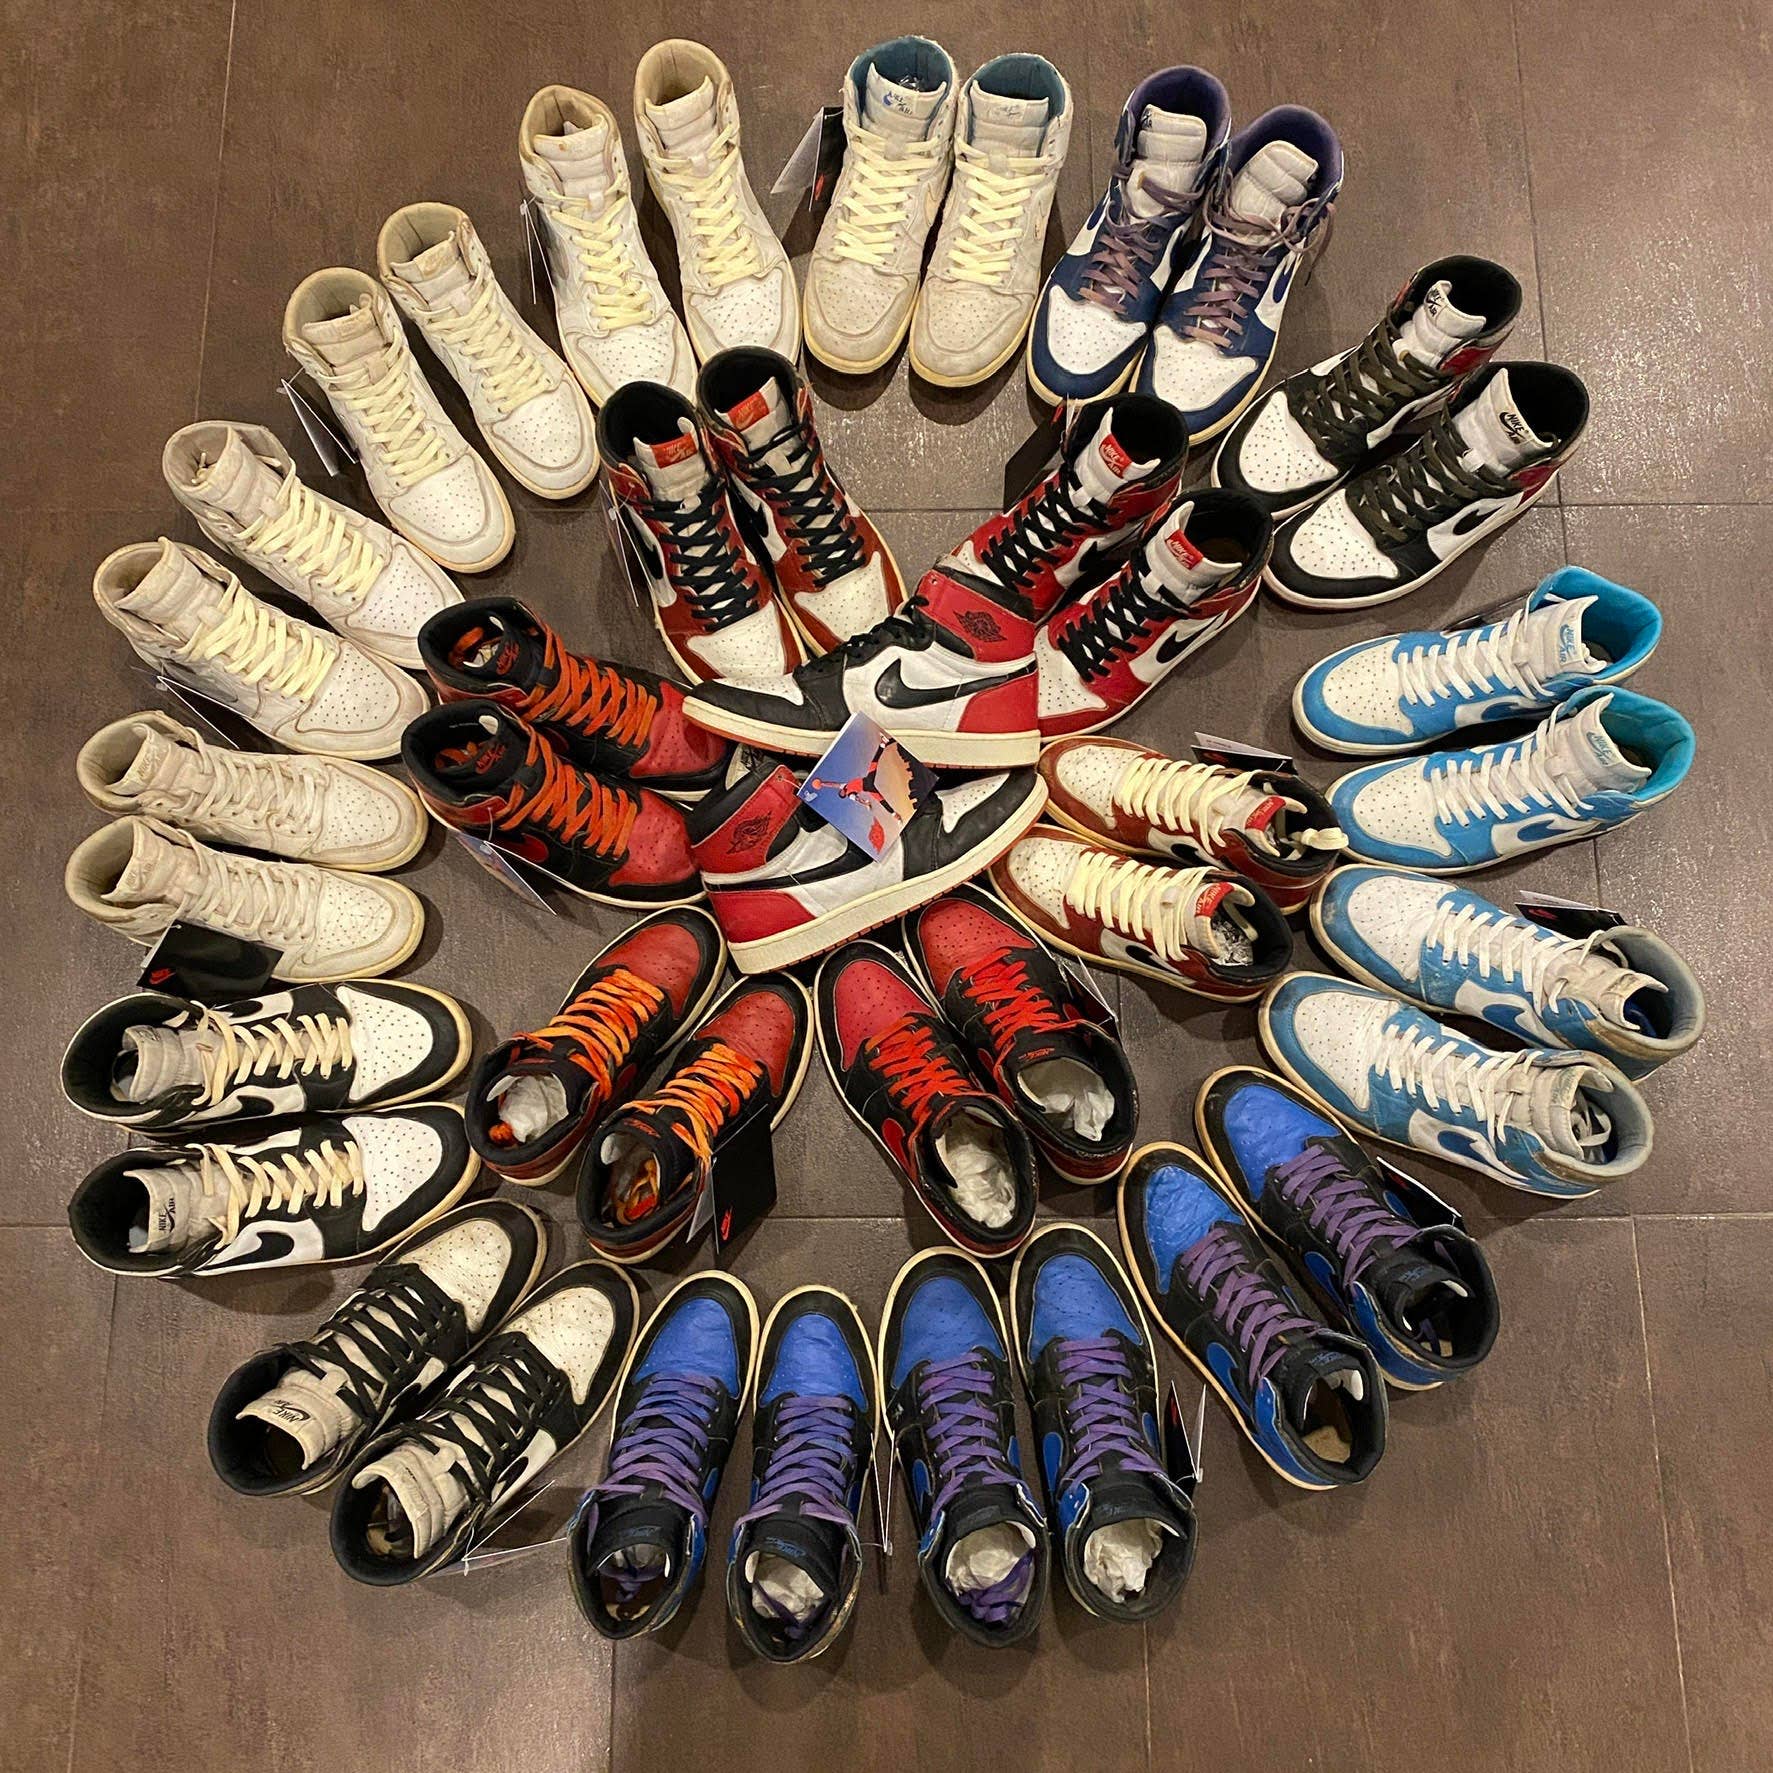 Overview shot of Tye Engmann's sneaker collection